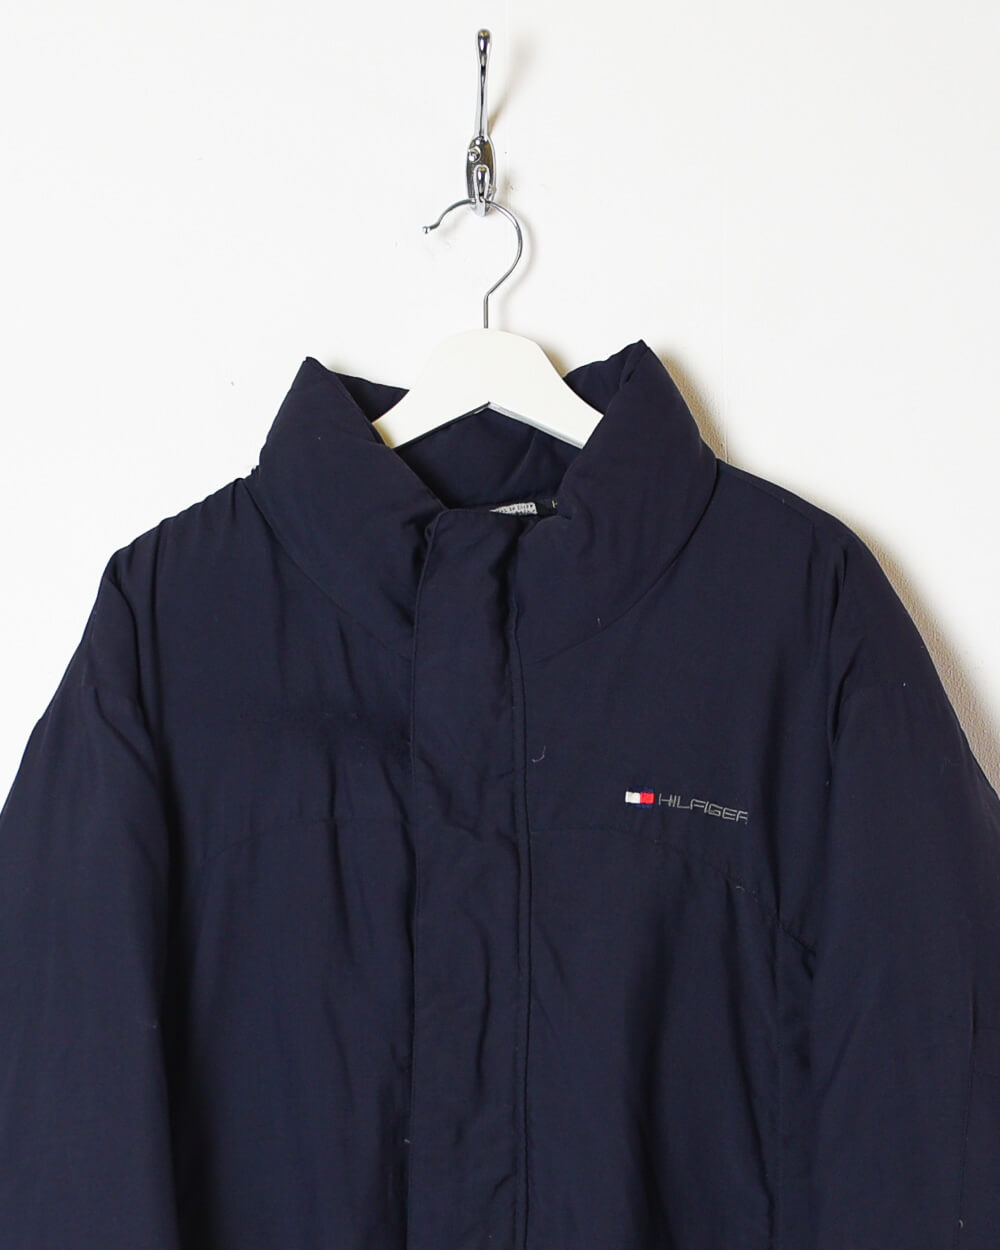 Navy Tommy Hilfiger Puffer Jacket - X-Large